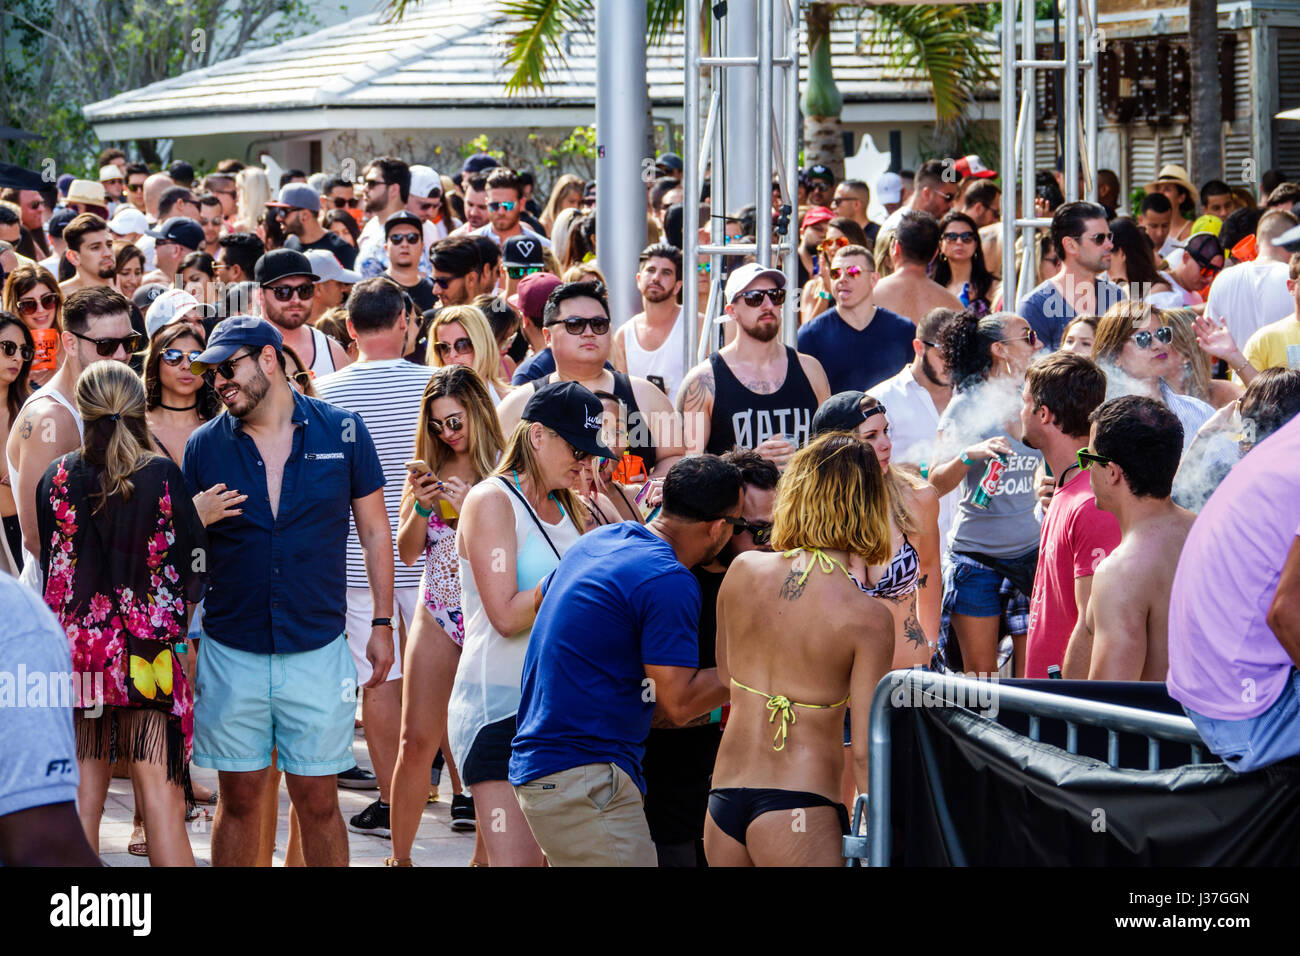 Miami Beach Florida,Miami Music Week,hotel pool party,crowd,standing,dancing,drink drinks beverage beverages drinking,young adult,men,women,visitors t Stock Photo